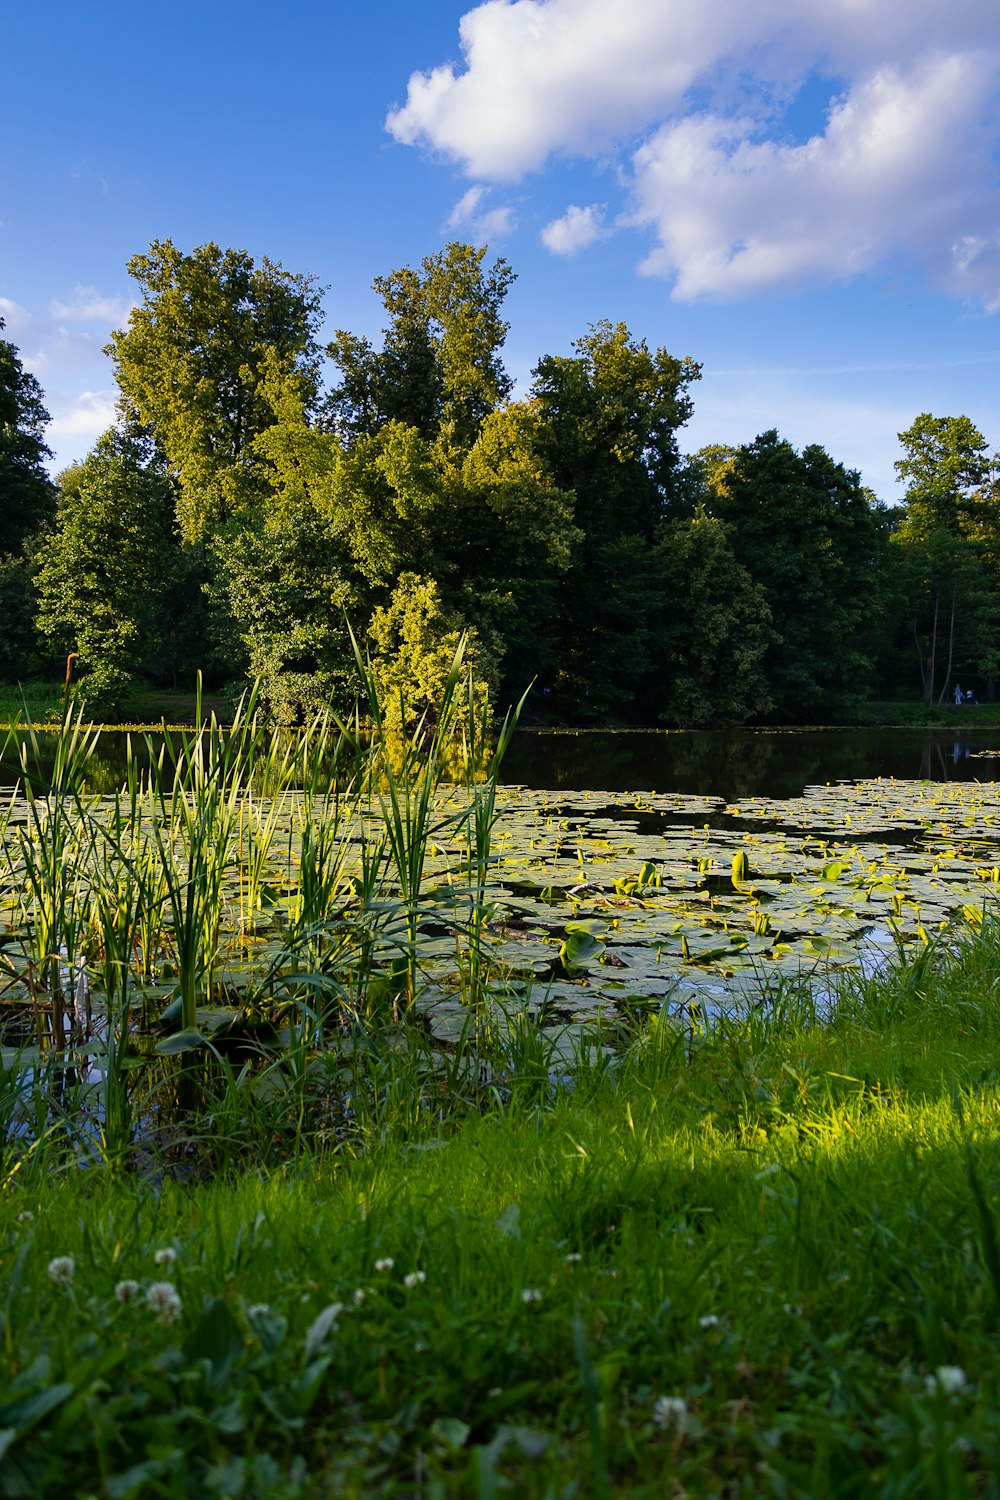 a pond with lily pads and trees in the background